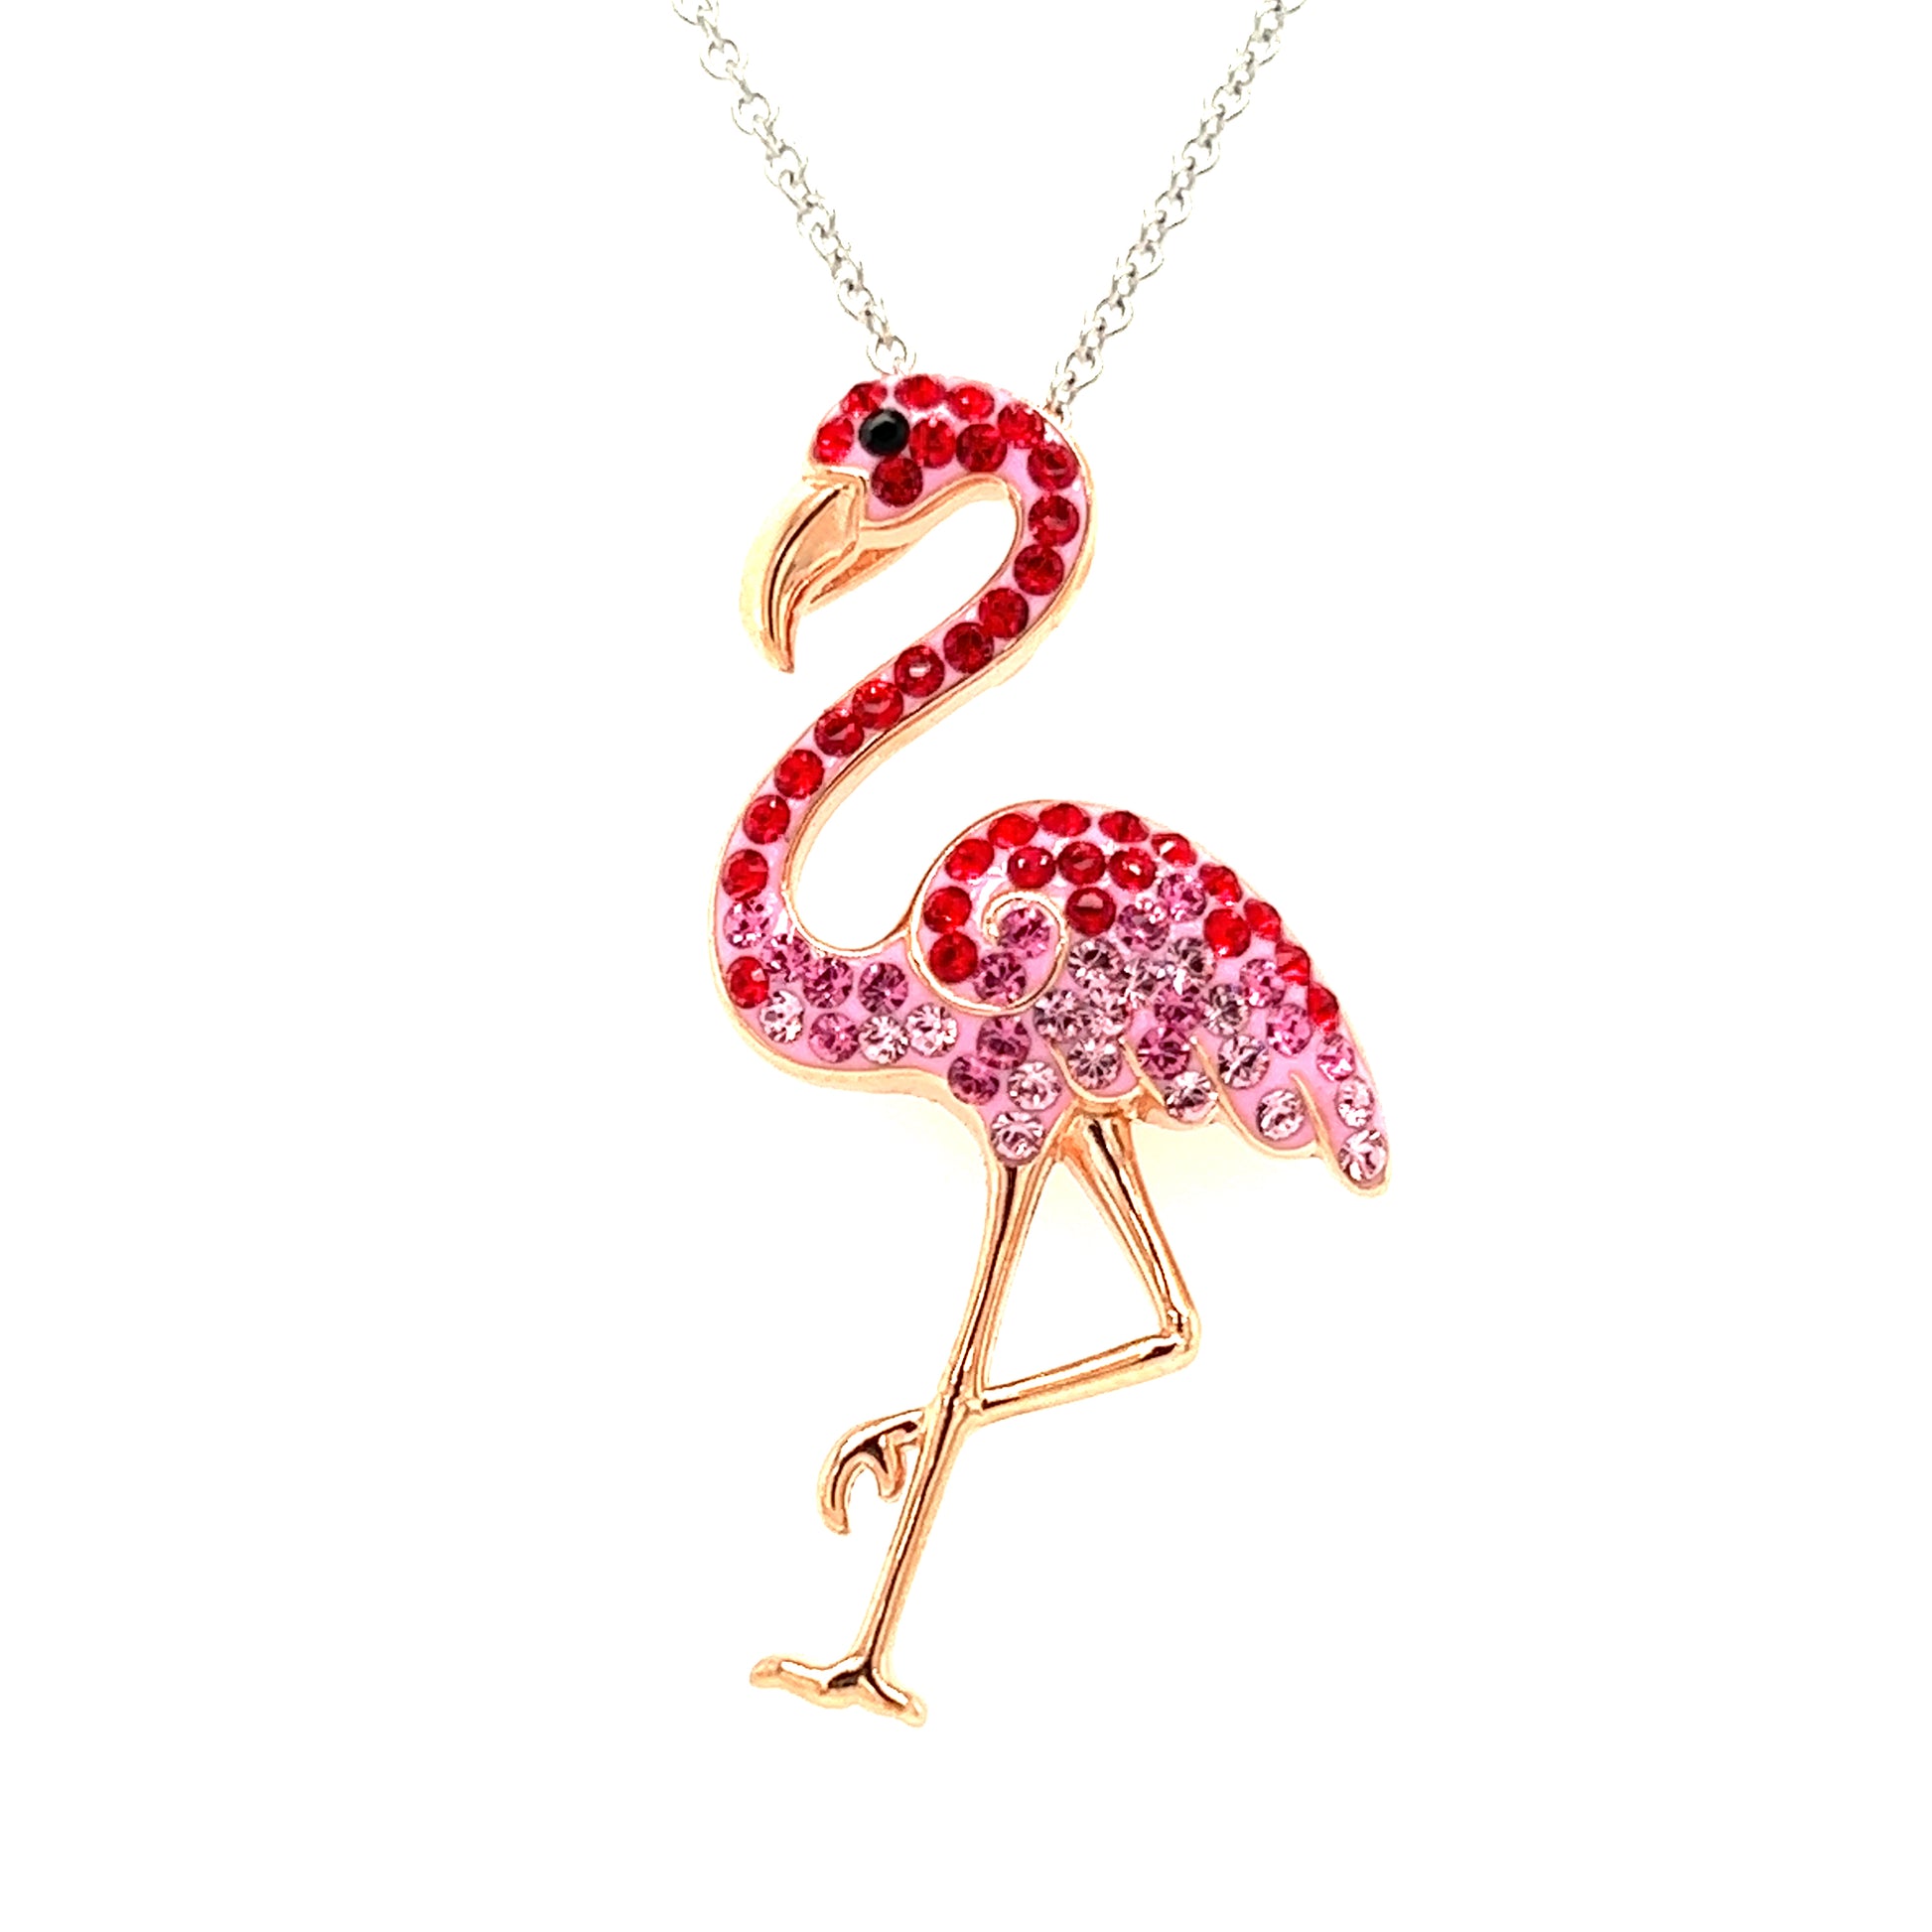 Flamingo Necklace with Red and Pink Crystals and Rose Gold Plating in Sterling Silver Pendant Front View